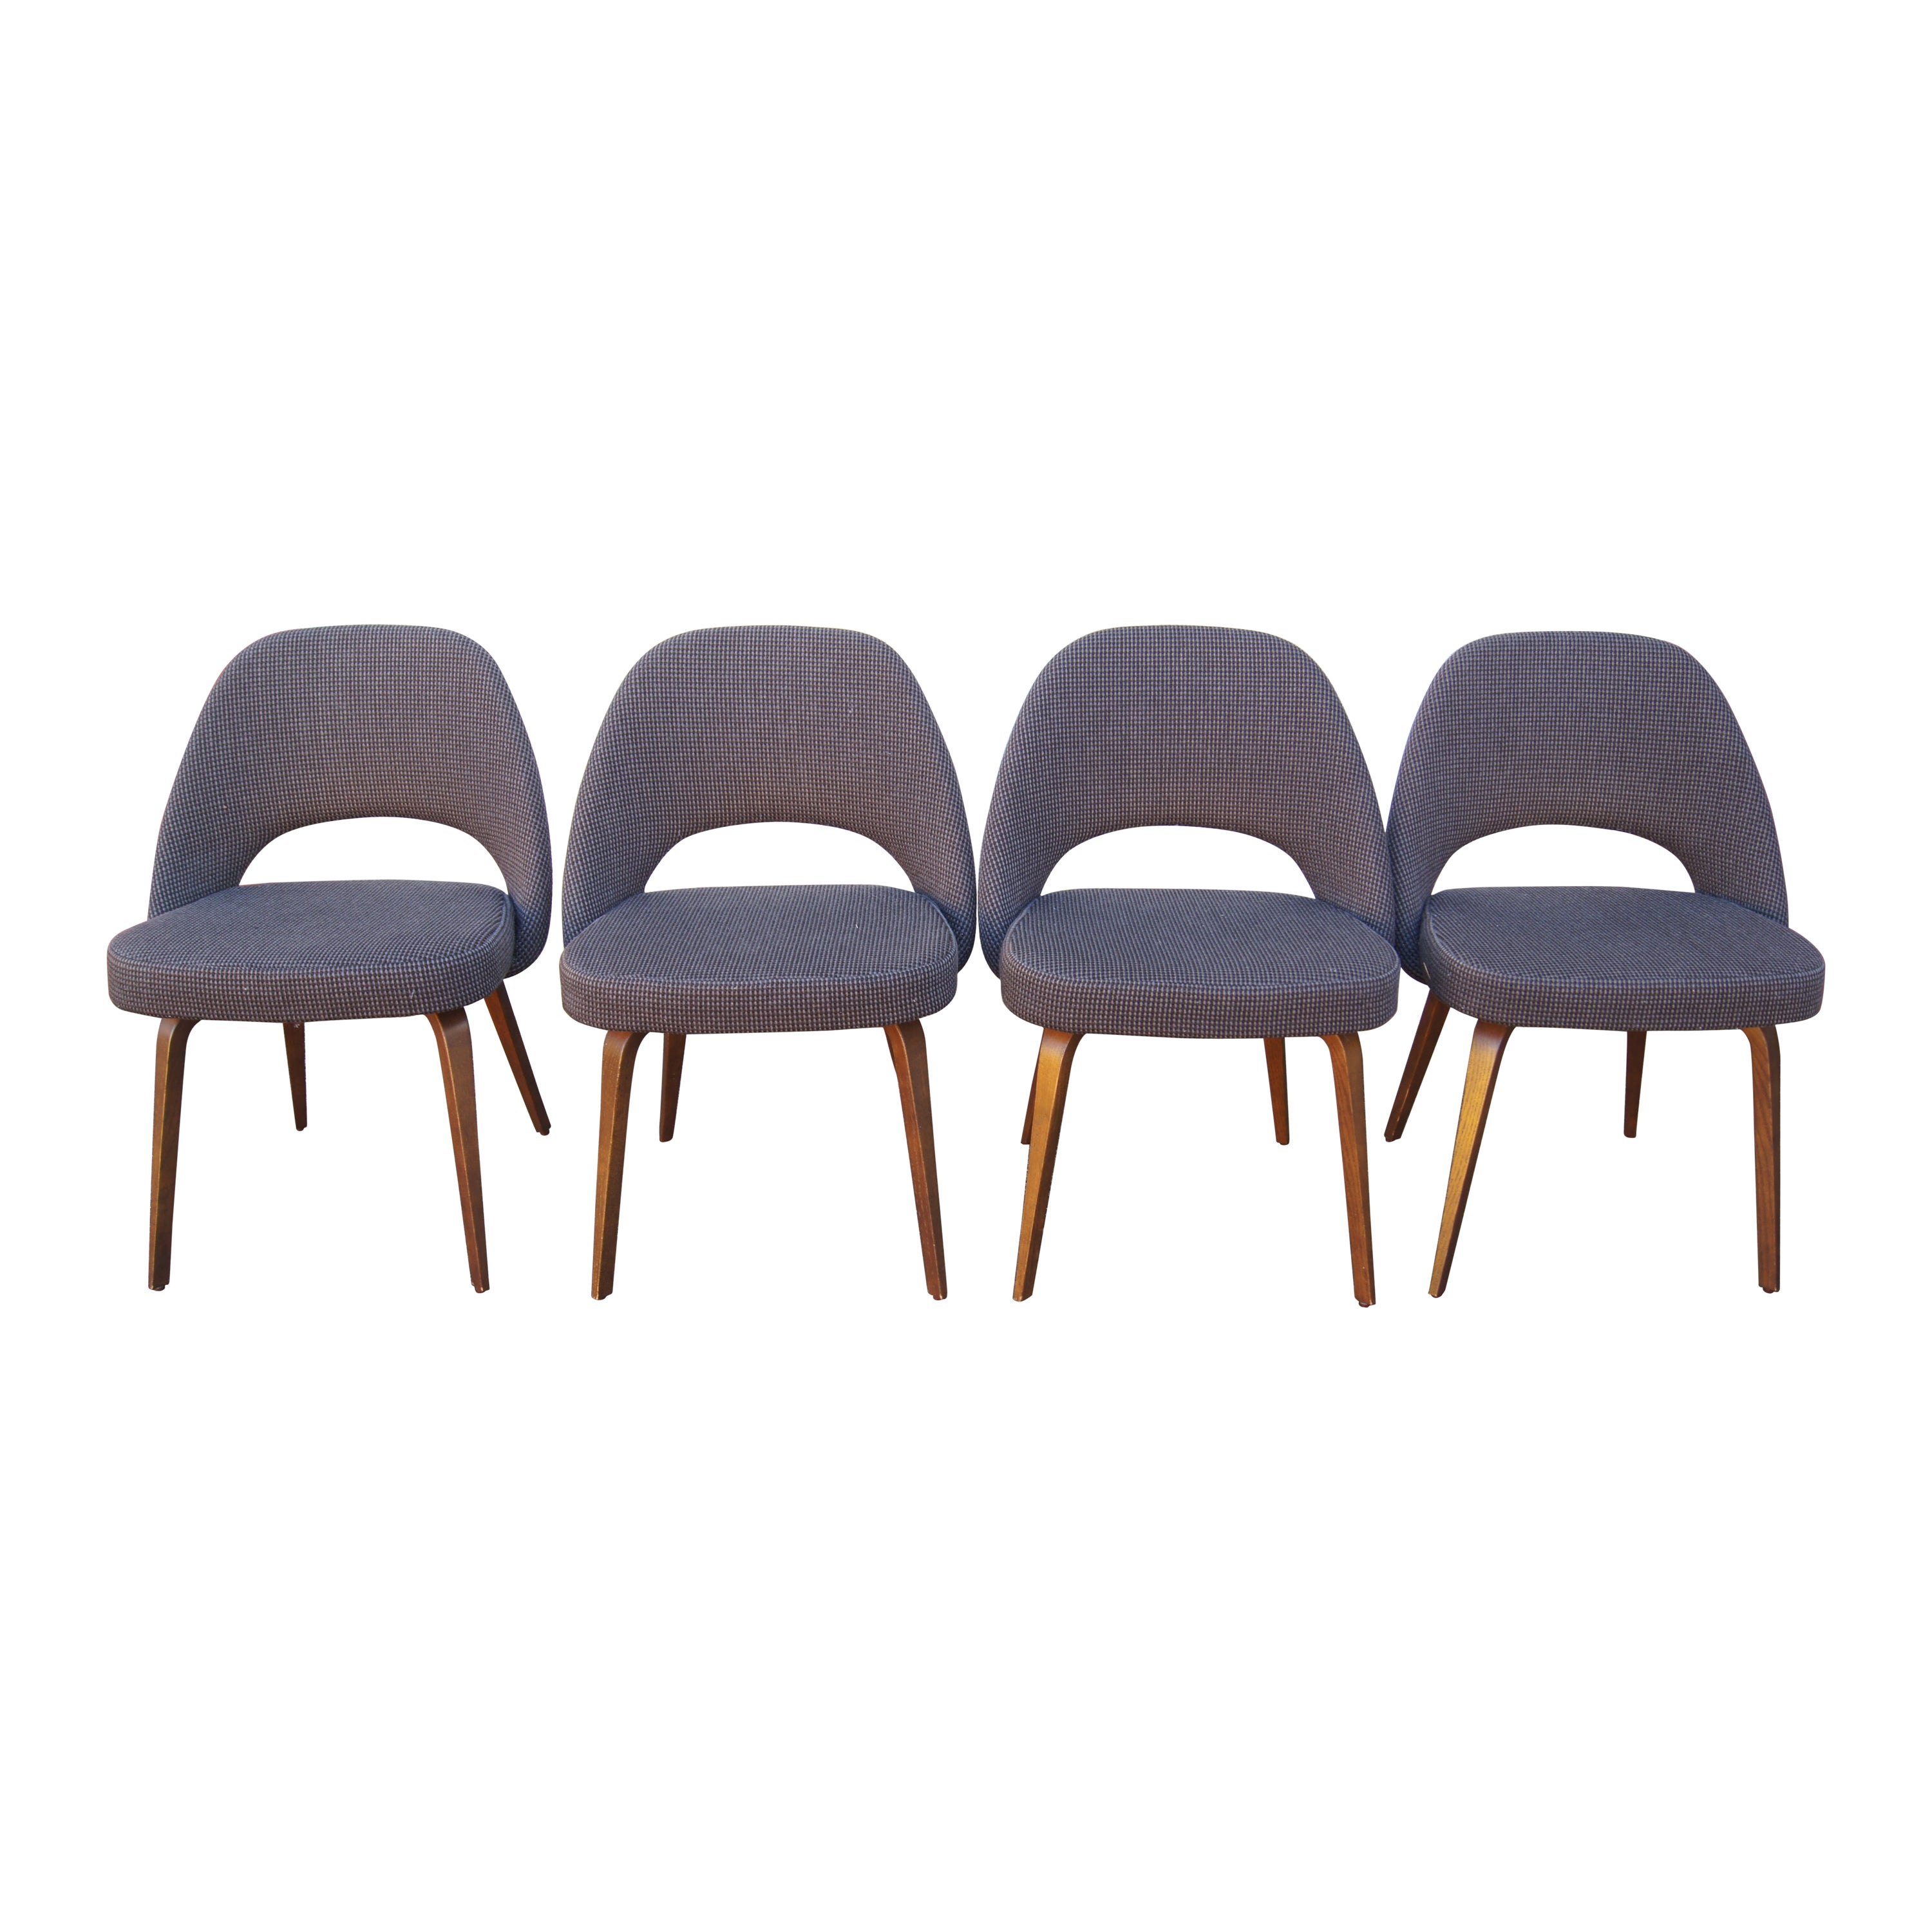 Set of Four Executive Side Chairs by Eero Saarinen for Knoll